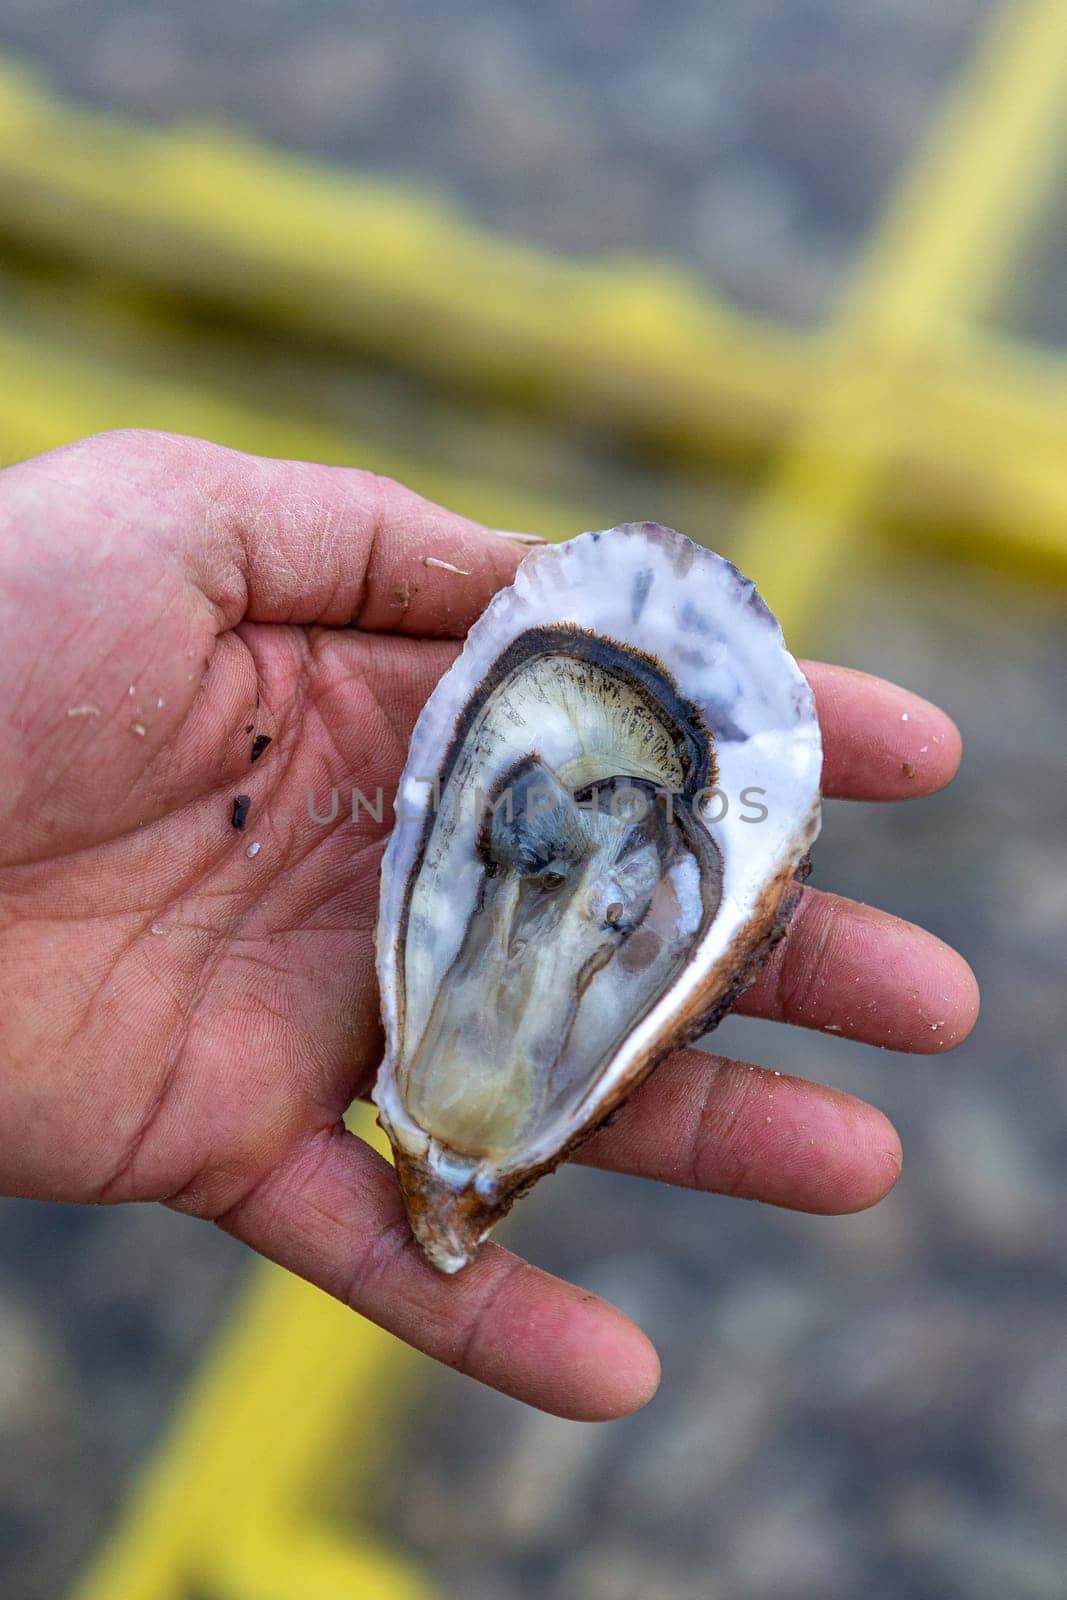 Fisherman s hand holding fresh Oyster after chopping by knife from Oyster farm, by JPC-PROD